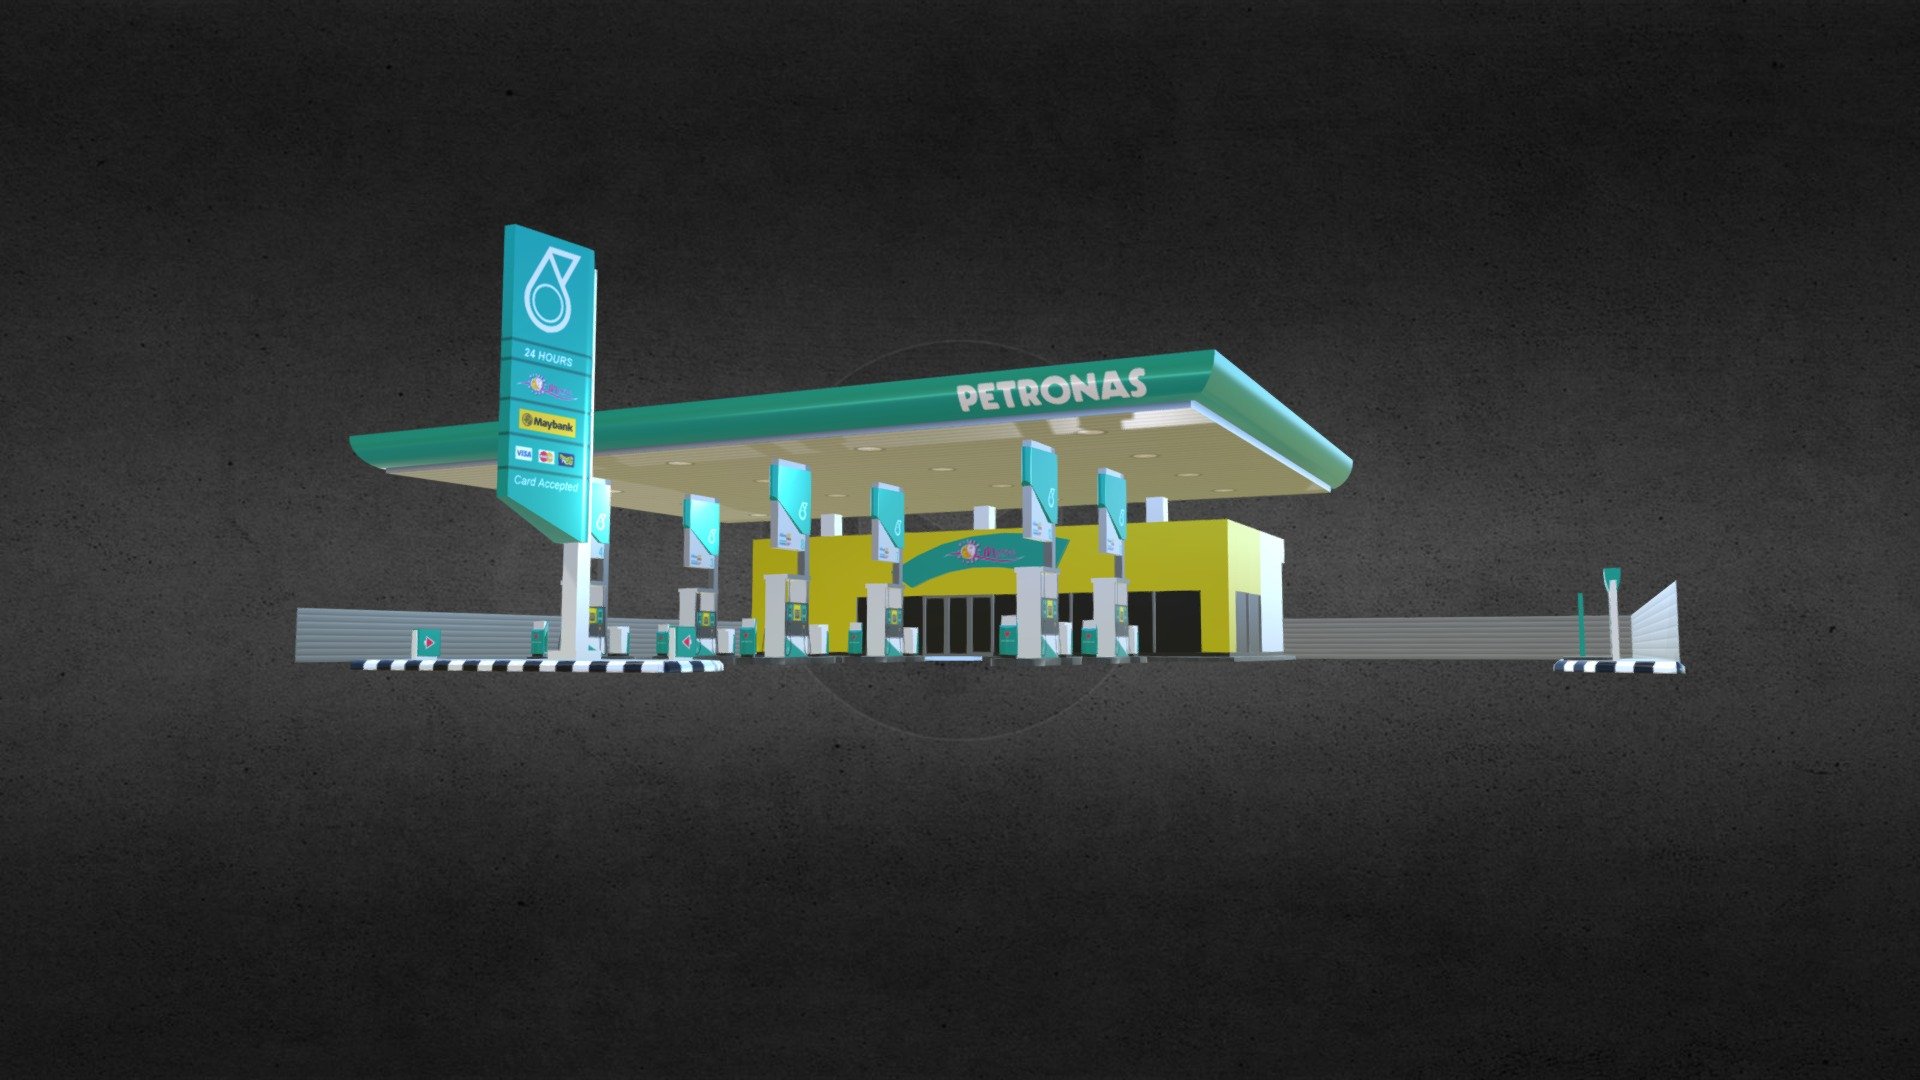 Petronas is Malaysian Oil &amp; Gas company, model created in Blender, Texture created in Photoshop 3d model